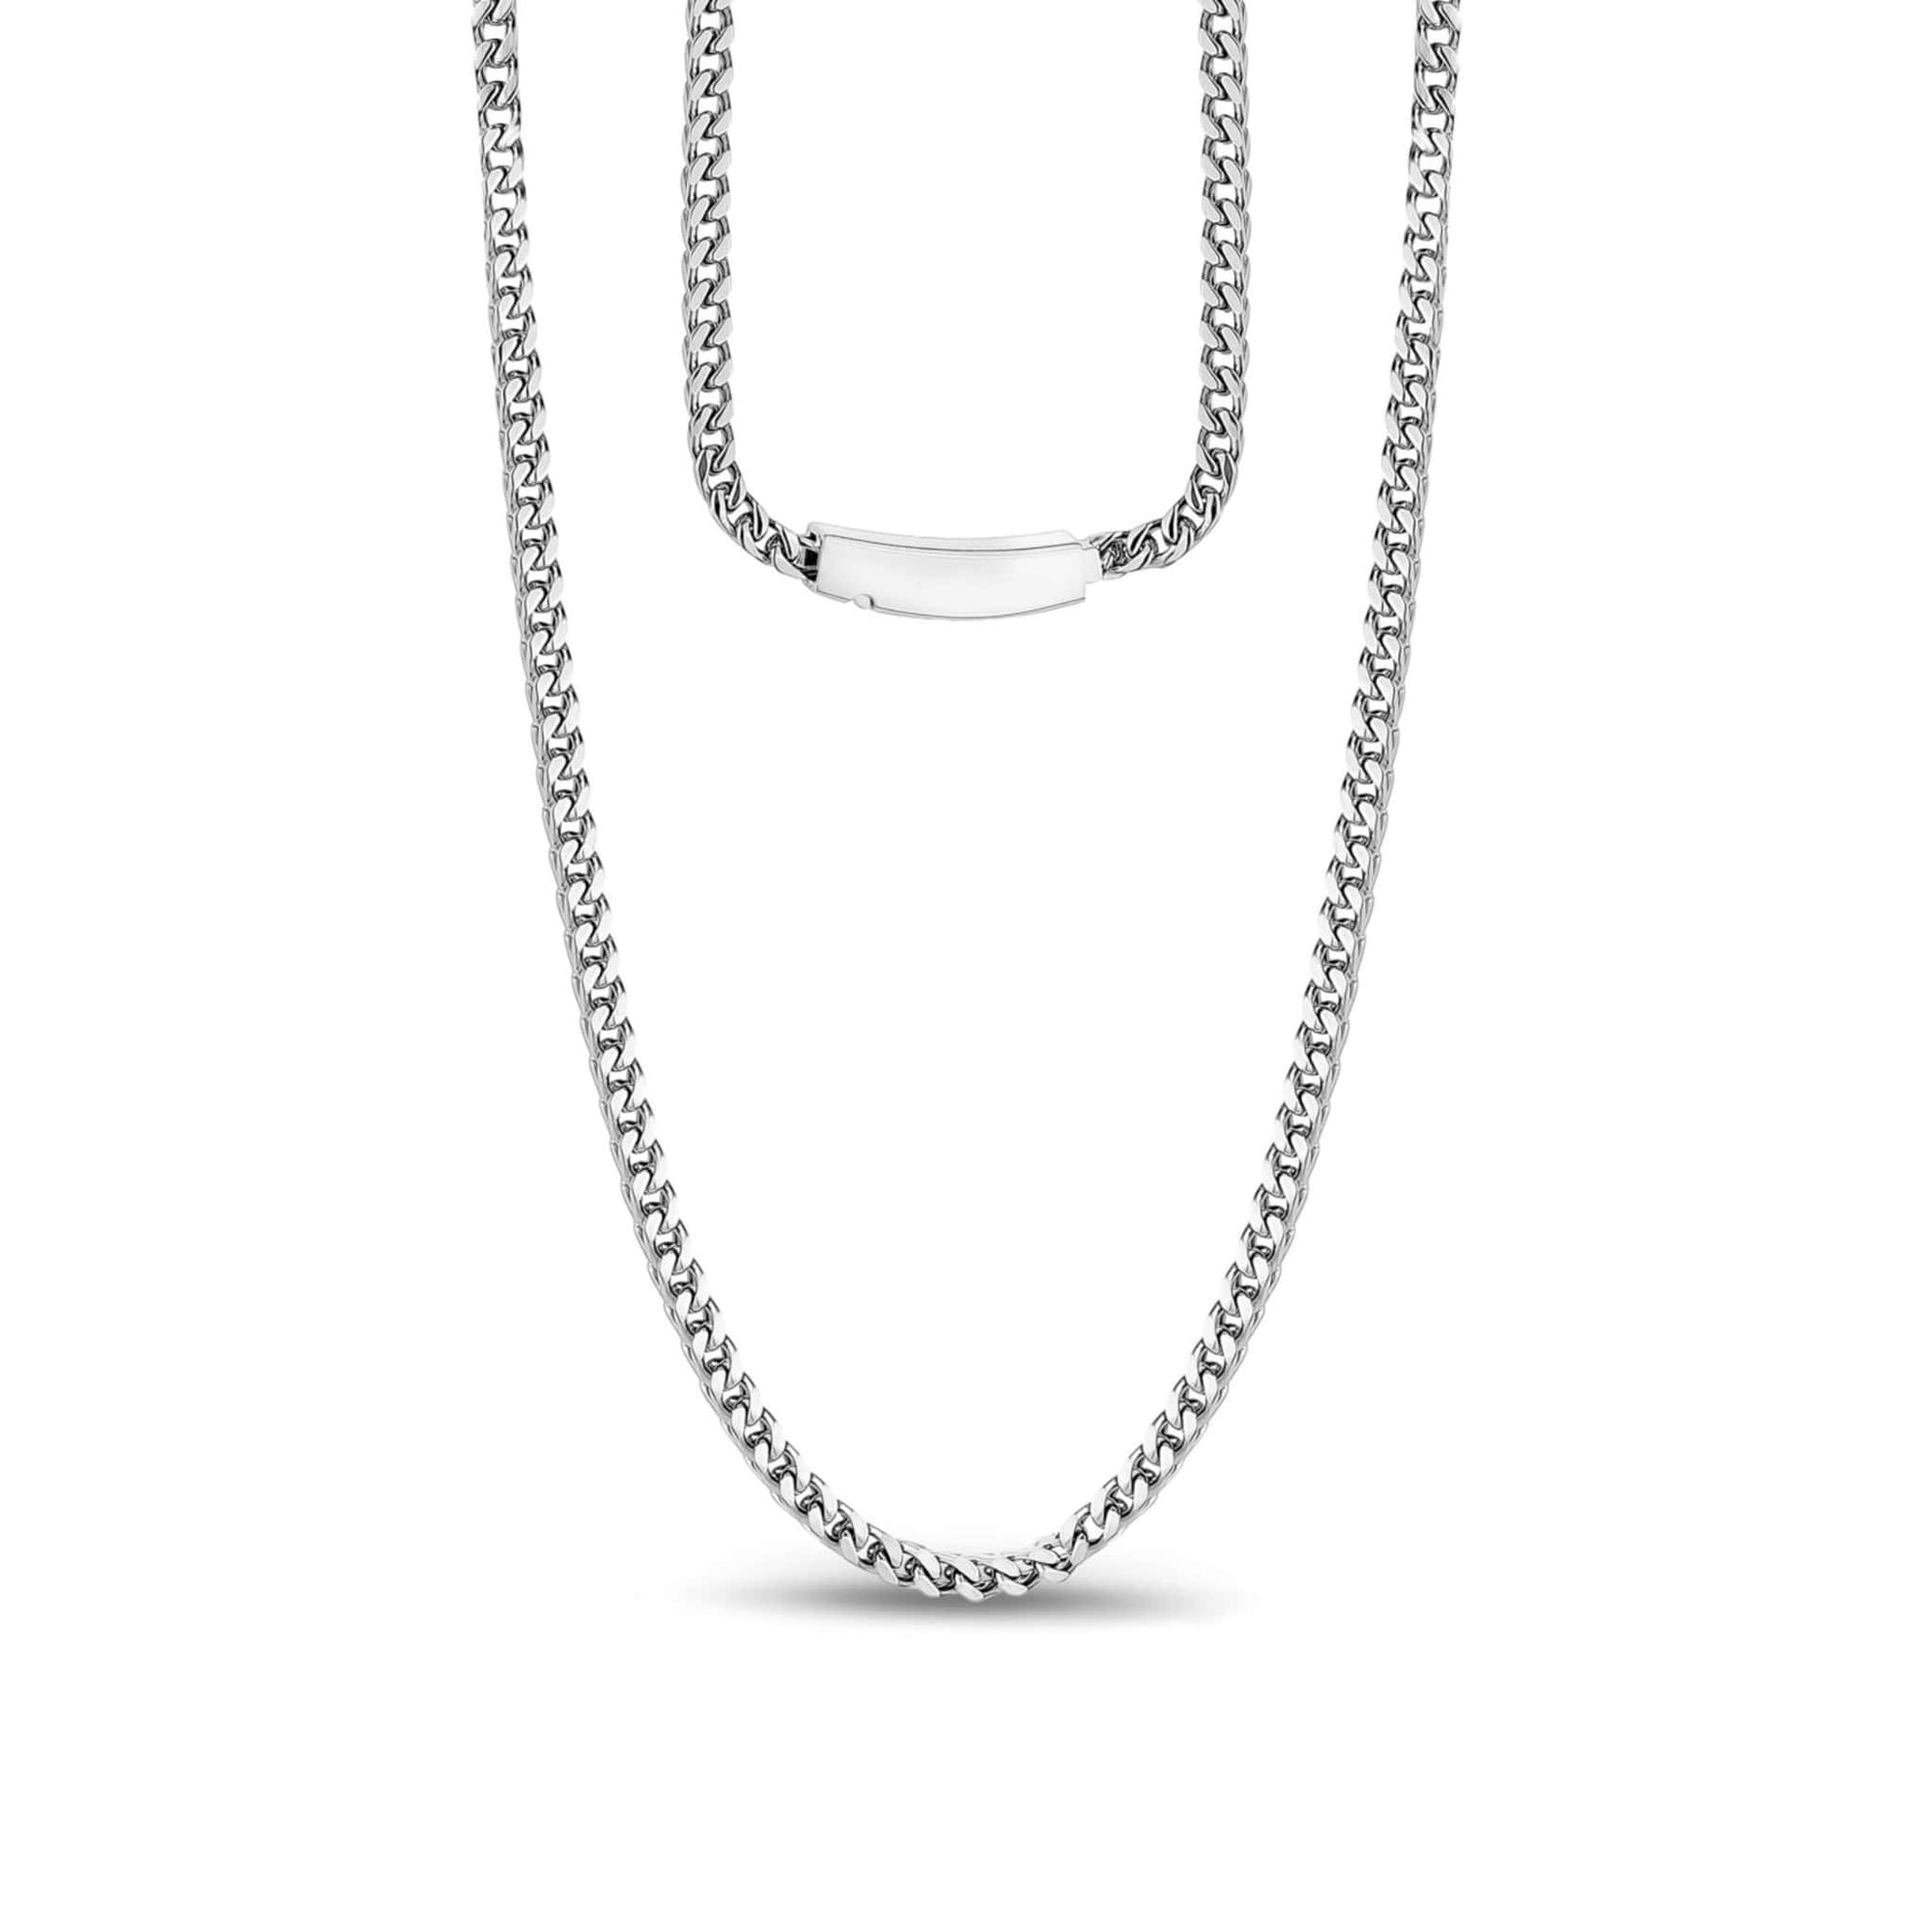 3mm Stainless Steel Franco Link Necklace at Arman's Jewellers